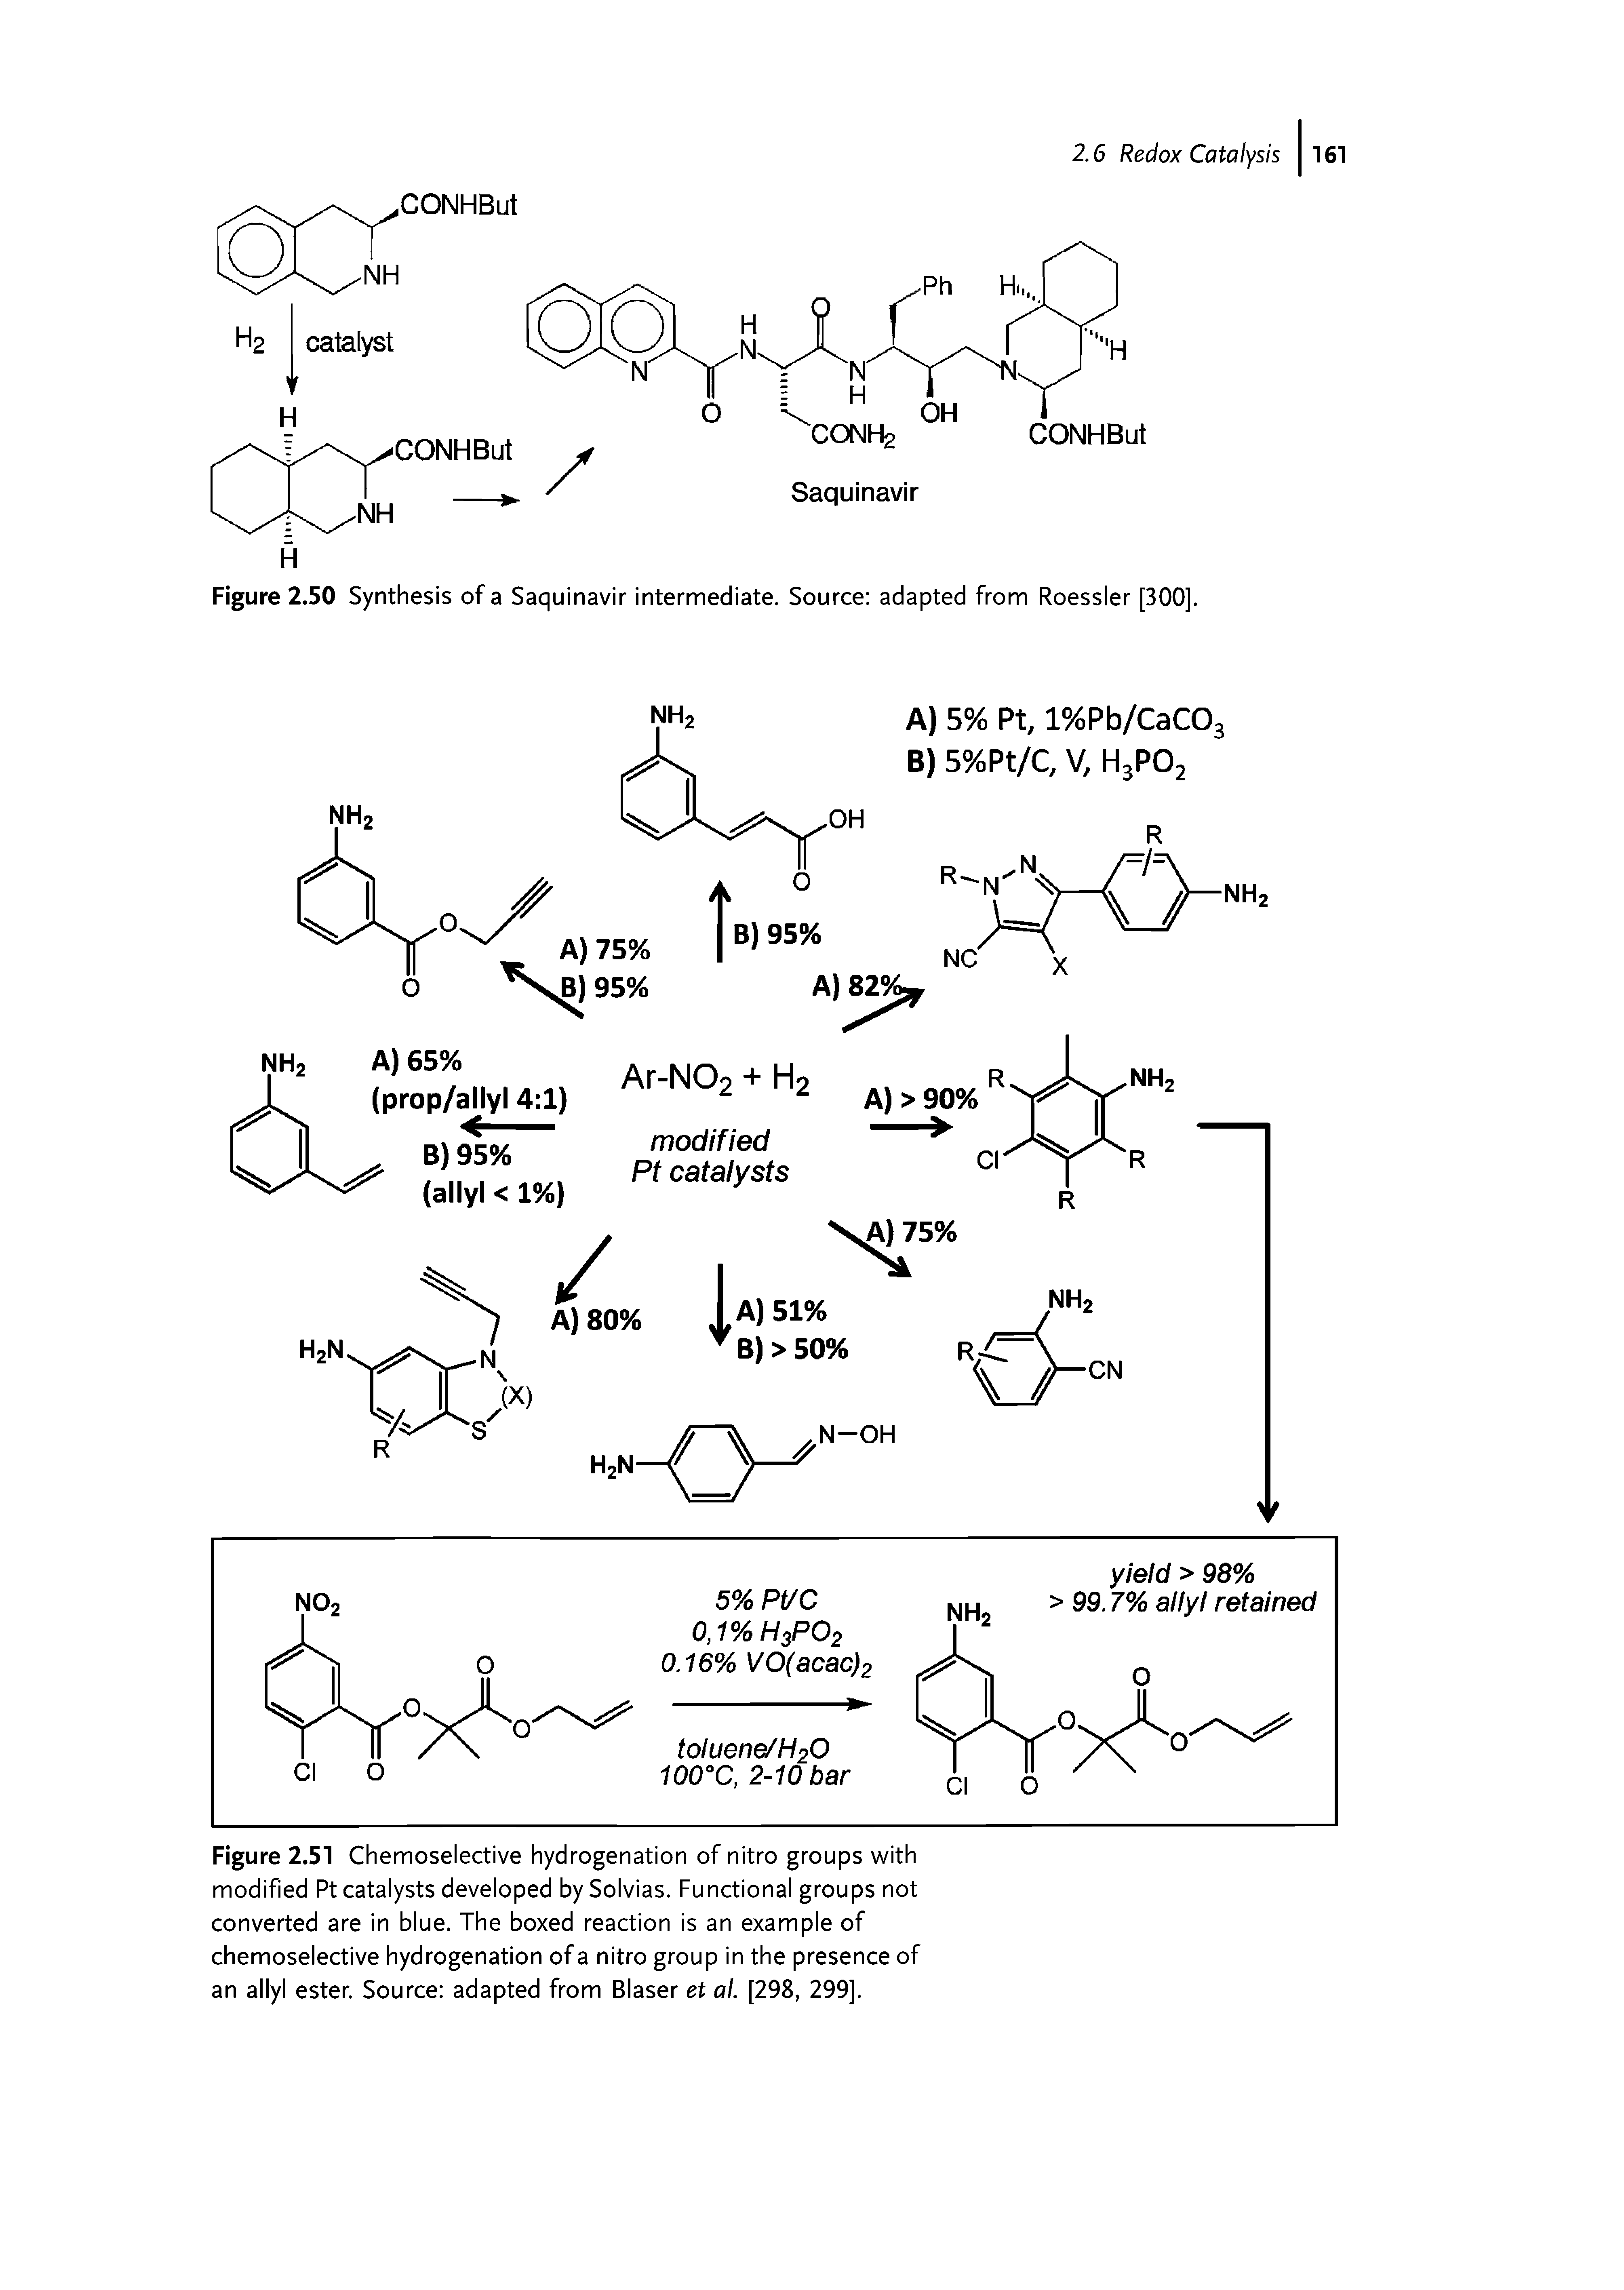 Figure 2.51 Chemoselective hydrogenation of nitro groups with modified Pt catalysts developed by Solvias. Functional groups not converted are in blue. The boxed reaction is an example of chemoselective hydrogenation of a nitro group in the presence of an allyl ester. Source adapted from Blaser et al. [298, 299].